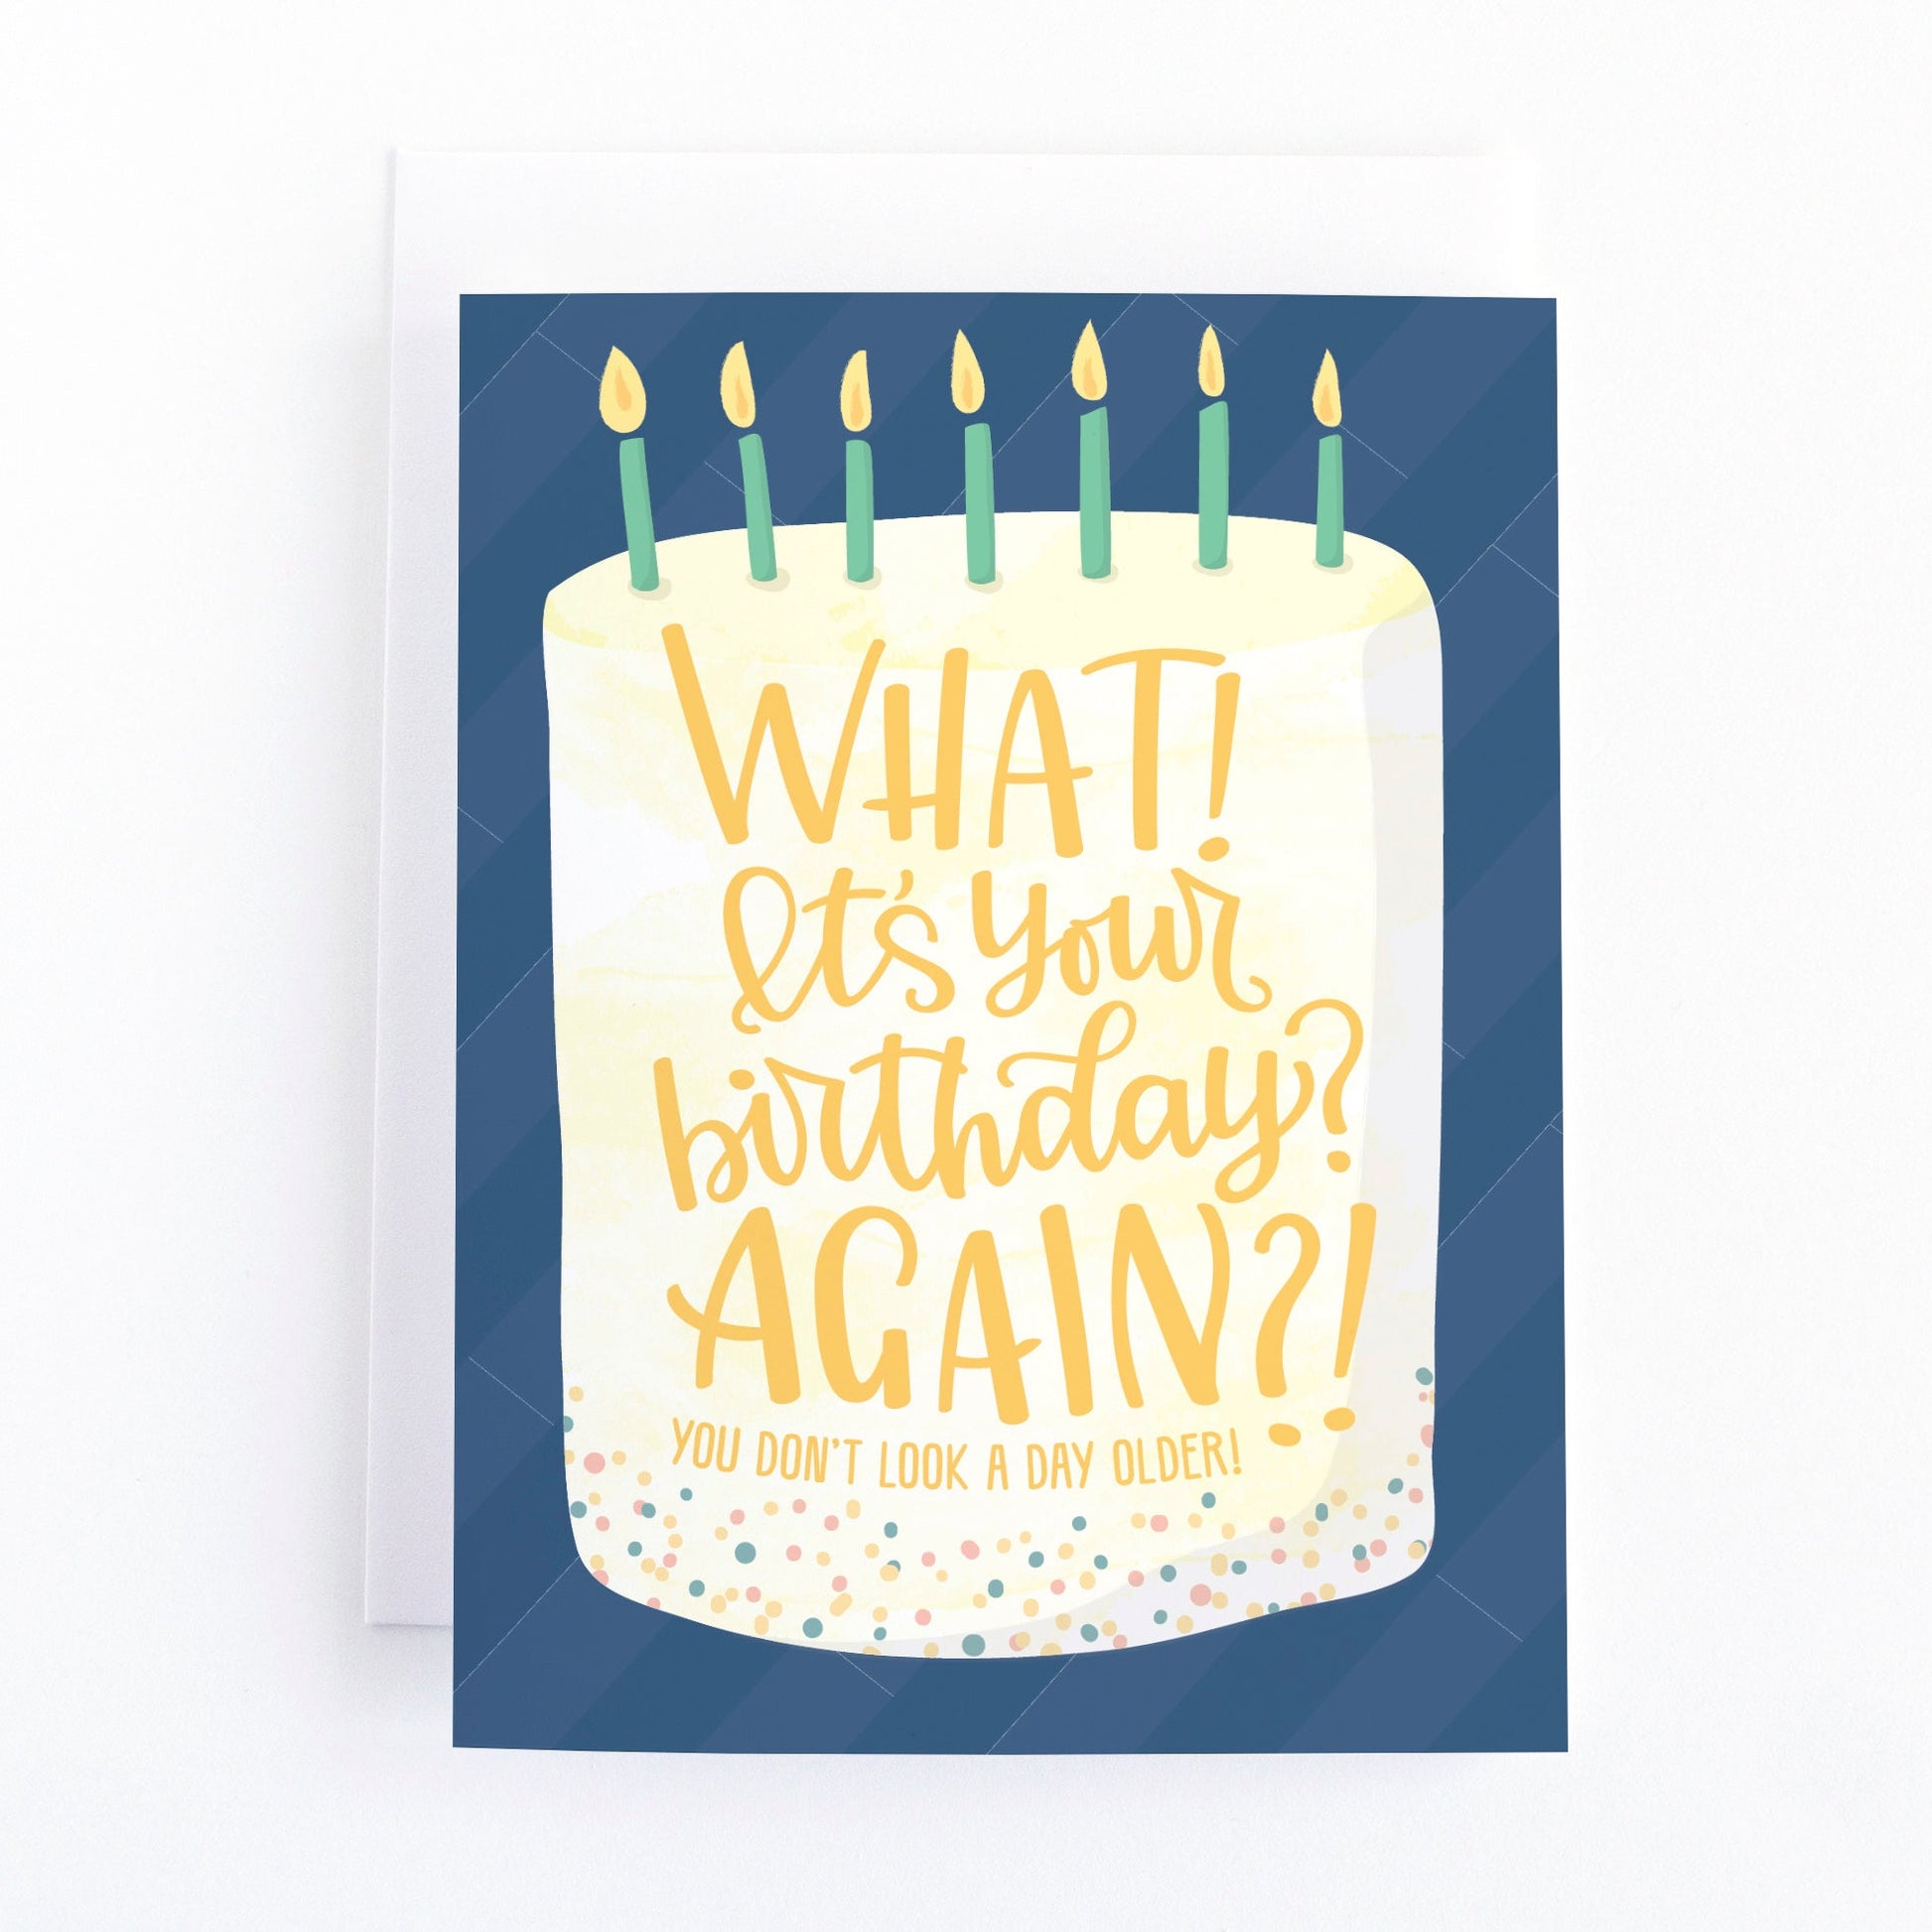 funny birthday card that has a hand lettered greeting on a fancy birthday cake that says, What?! It's your birthday? Again? You don't look a day Older